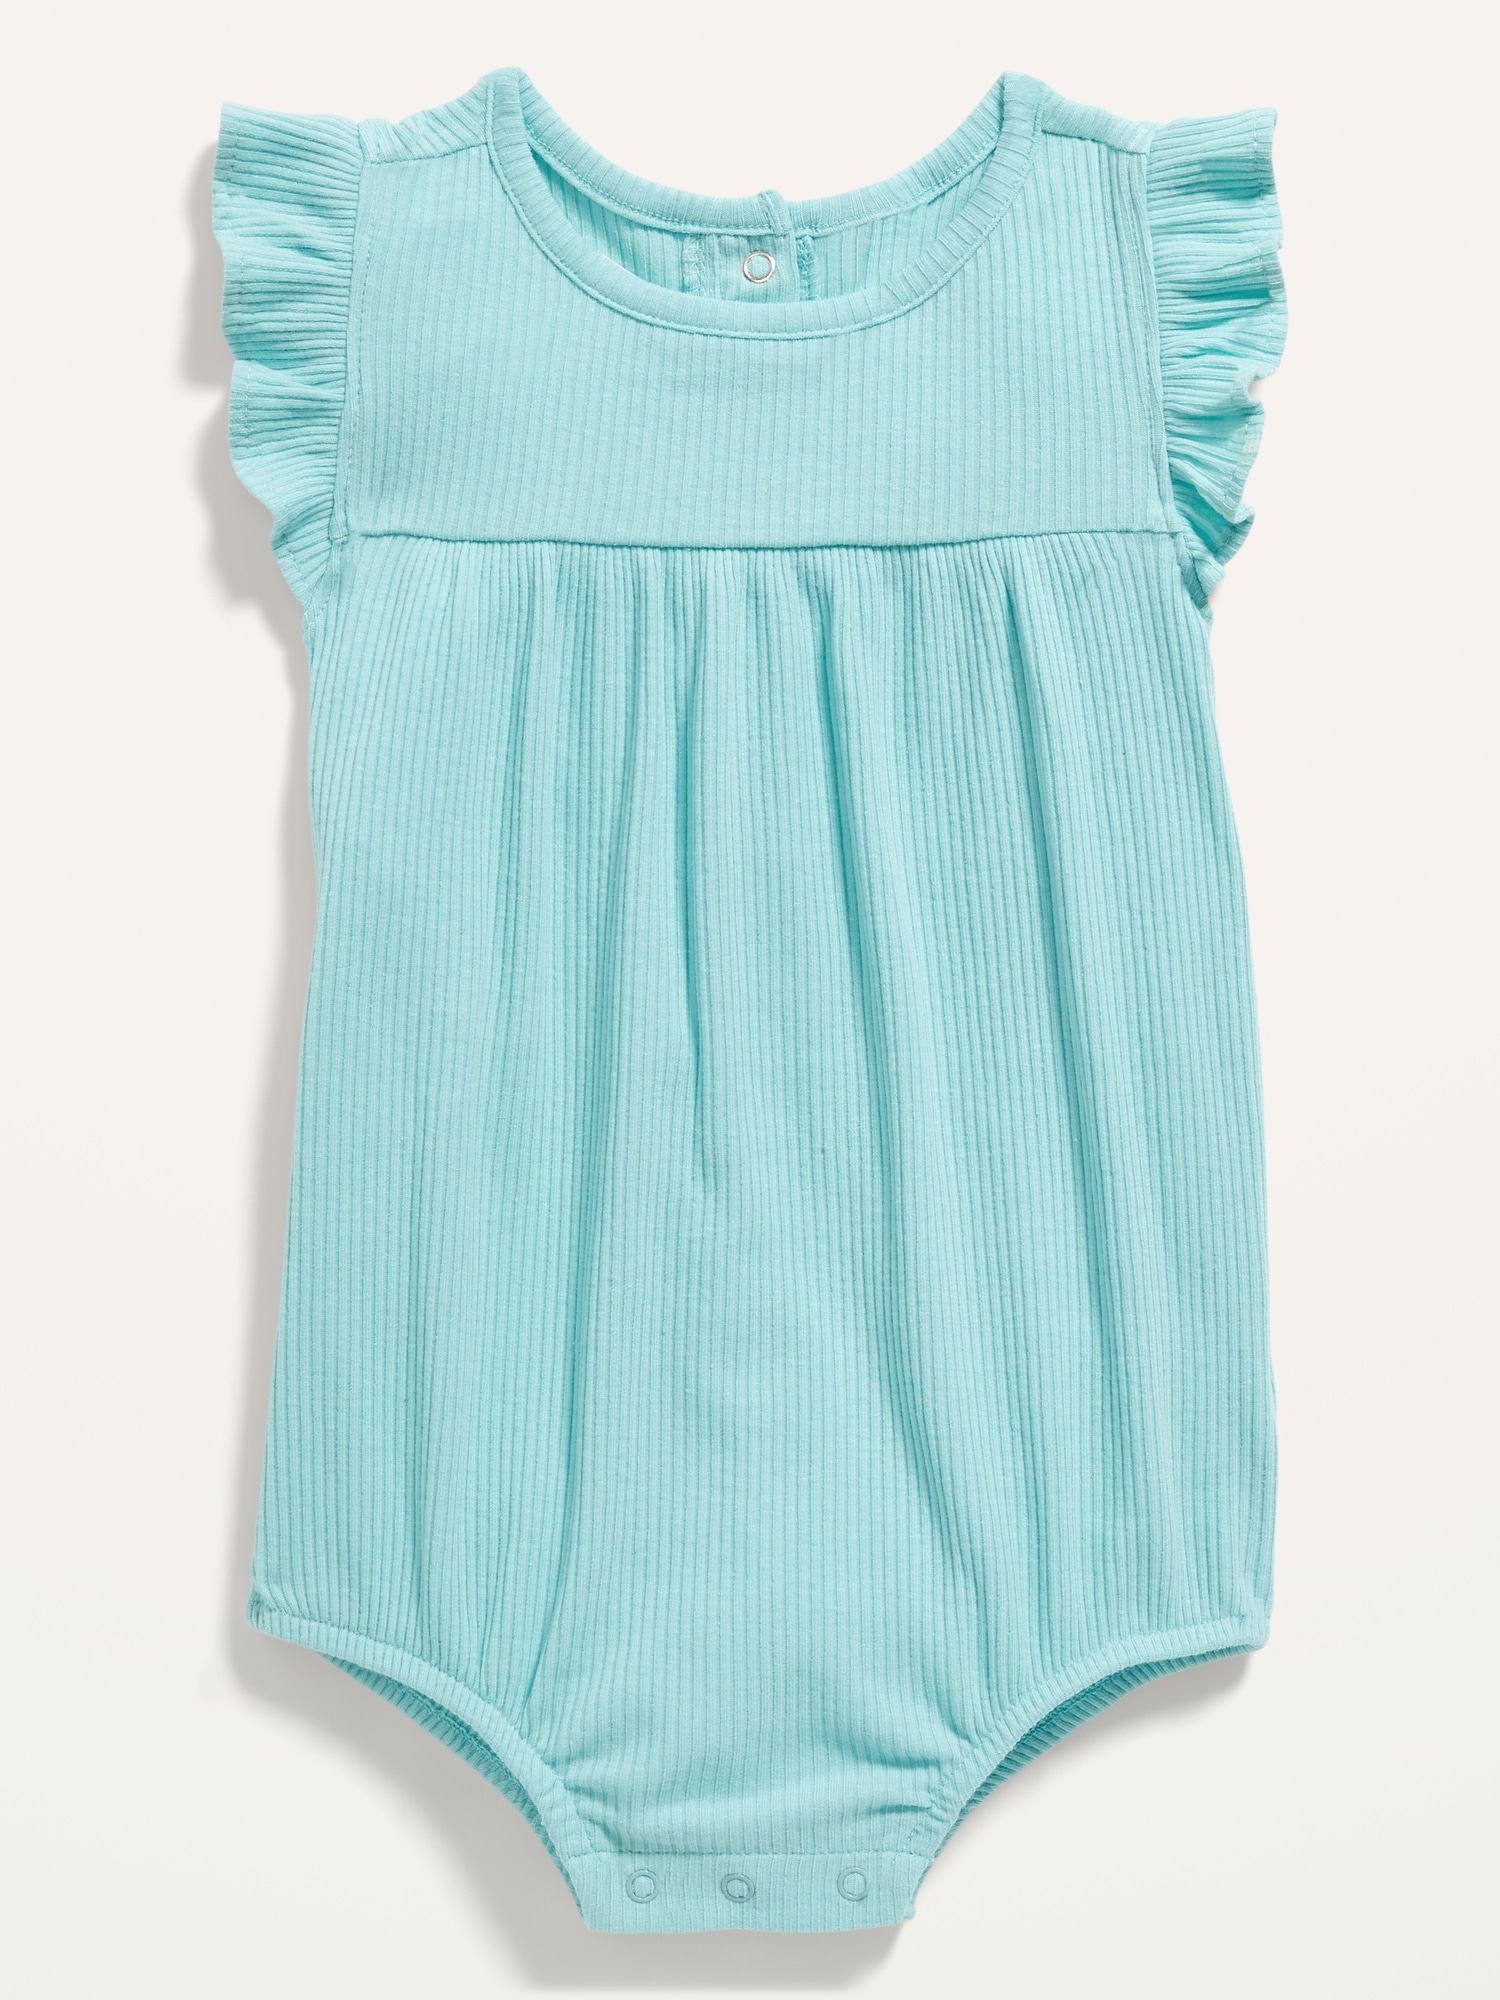 Rib-Knit Flutter-Sleeve One-Piece Romper for Baby | Old Navy